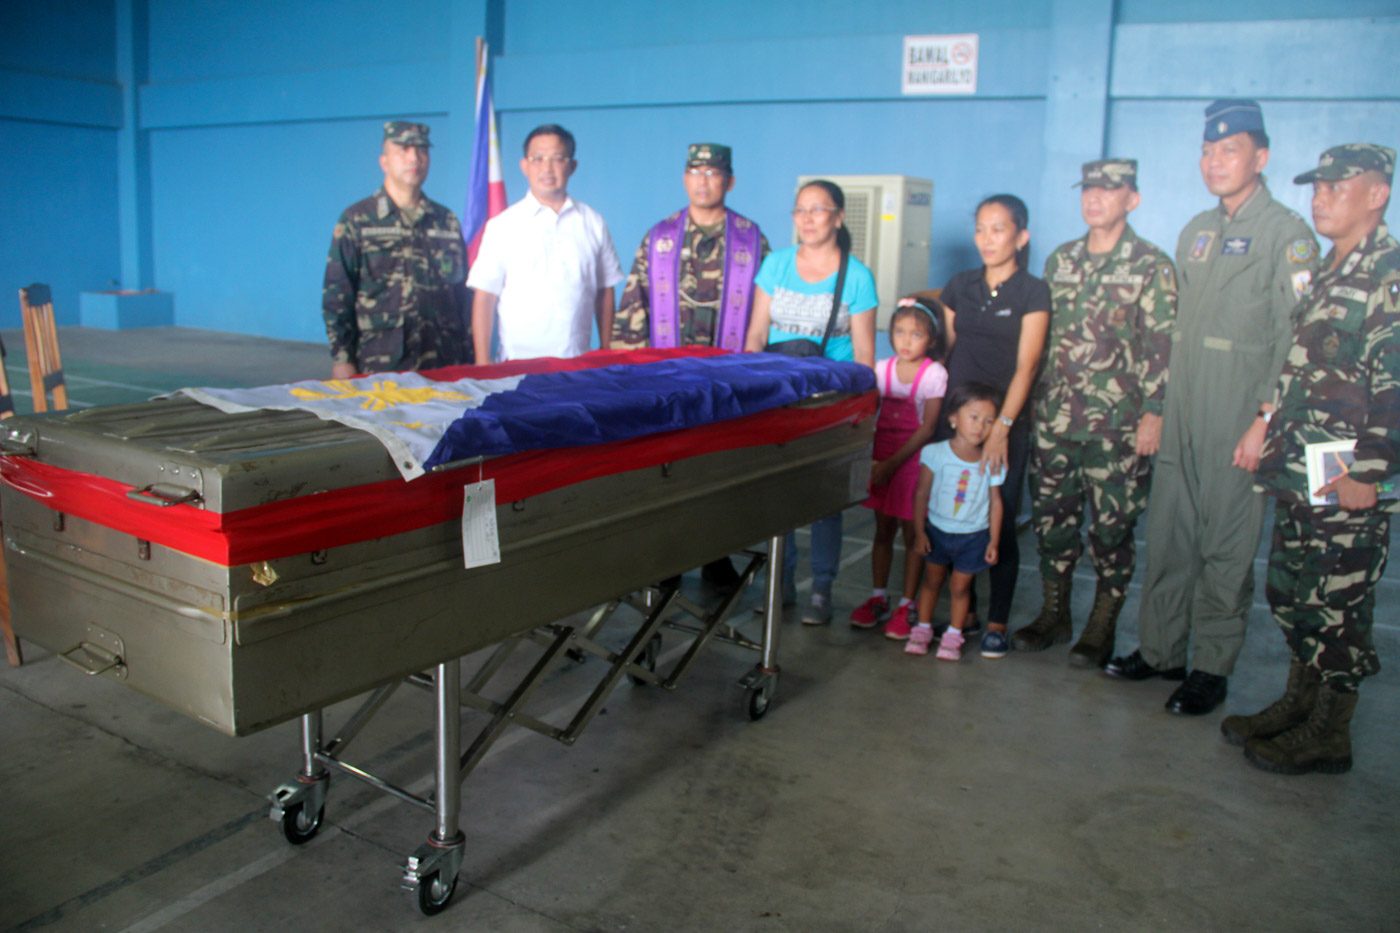 HONOR. Army Private First Class Reymart E. Carloto is posthumously given honors by his fellow soldiers. Photo by Rhaydz Barcia/Rappler 